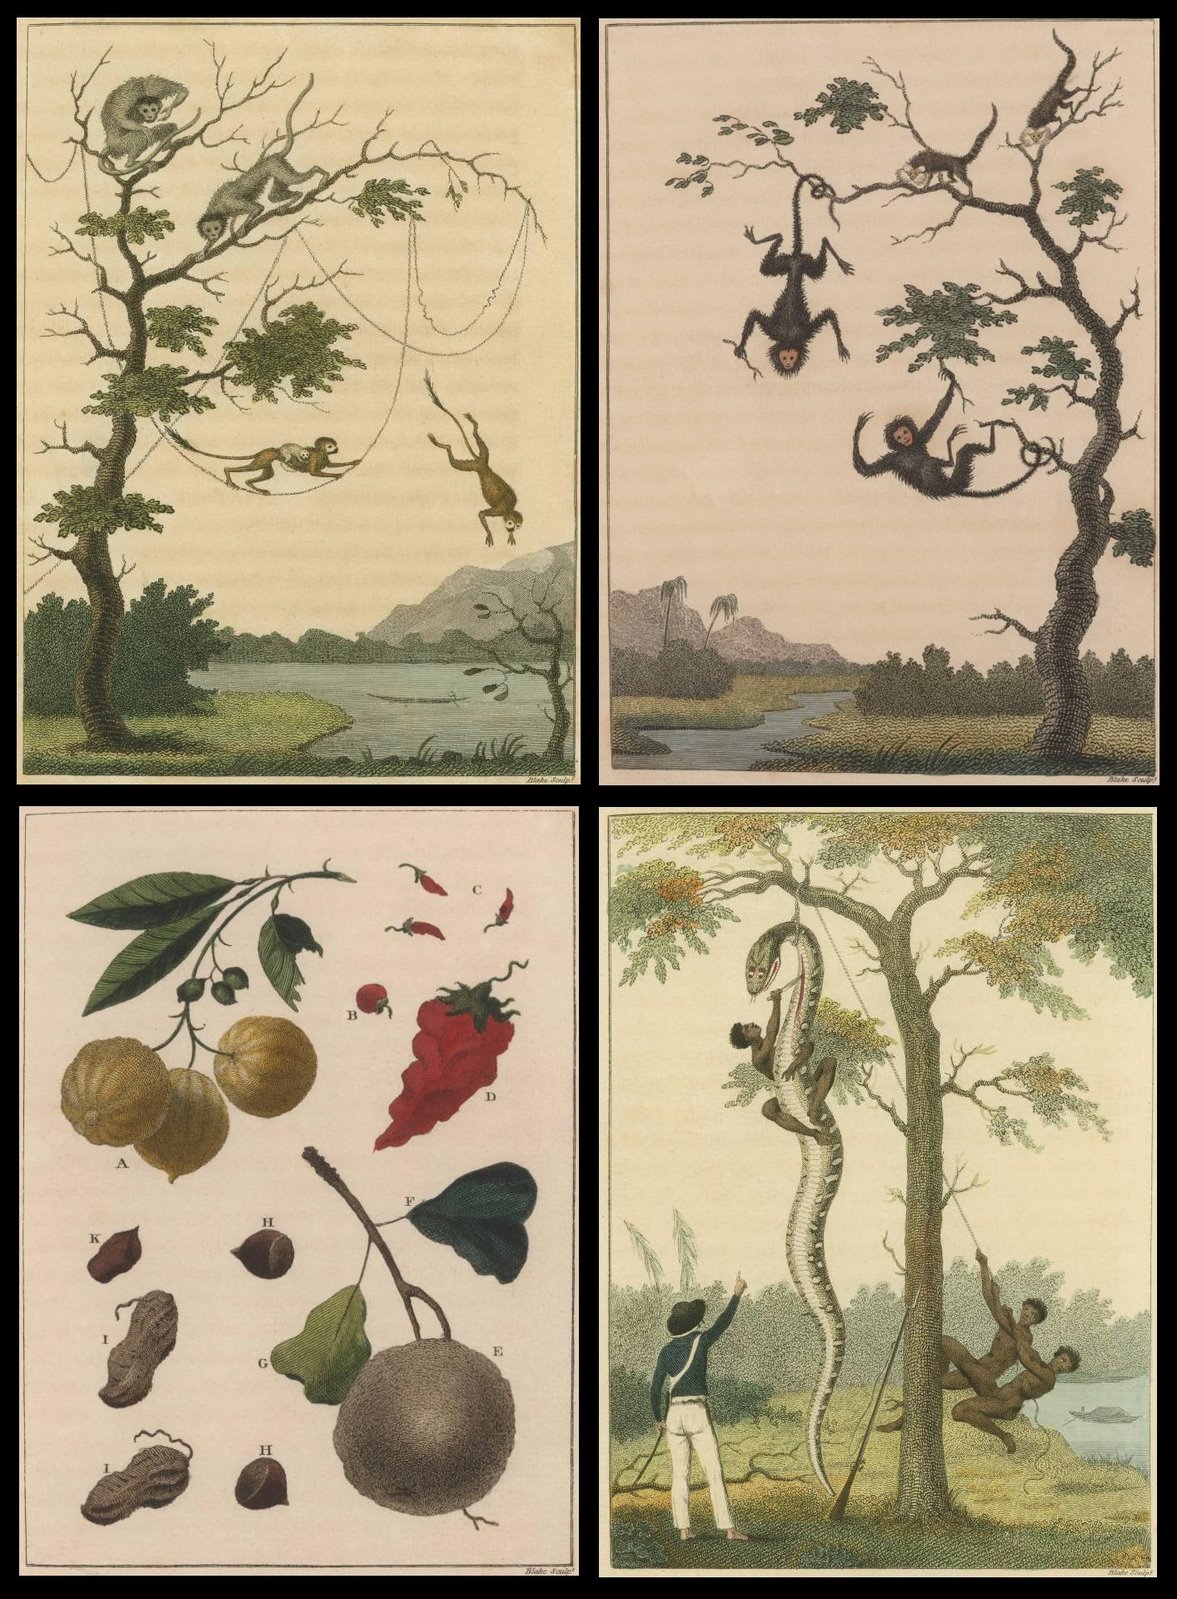 monkeys, snakes and fruit in Surinam 1792